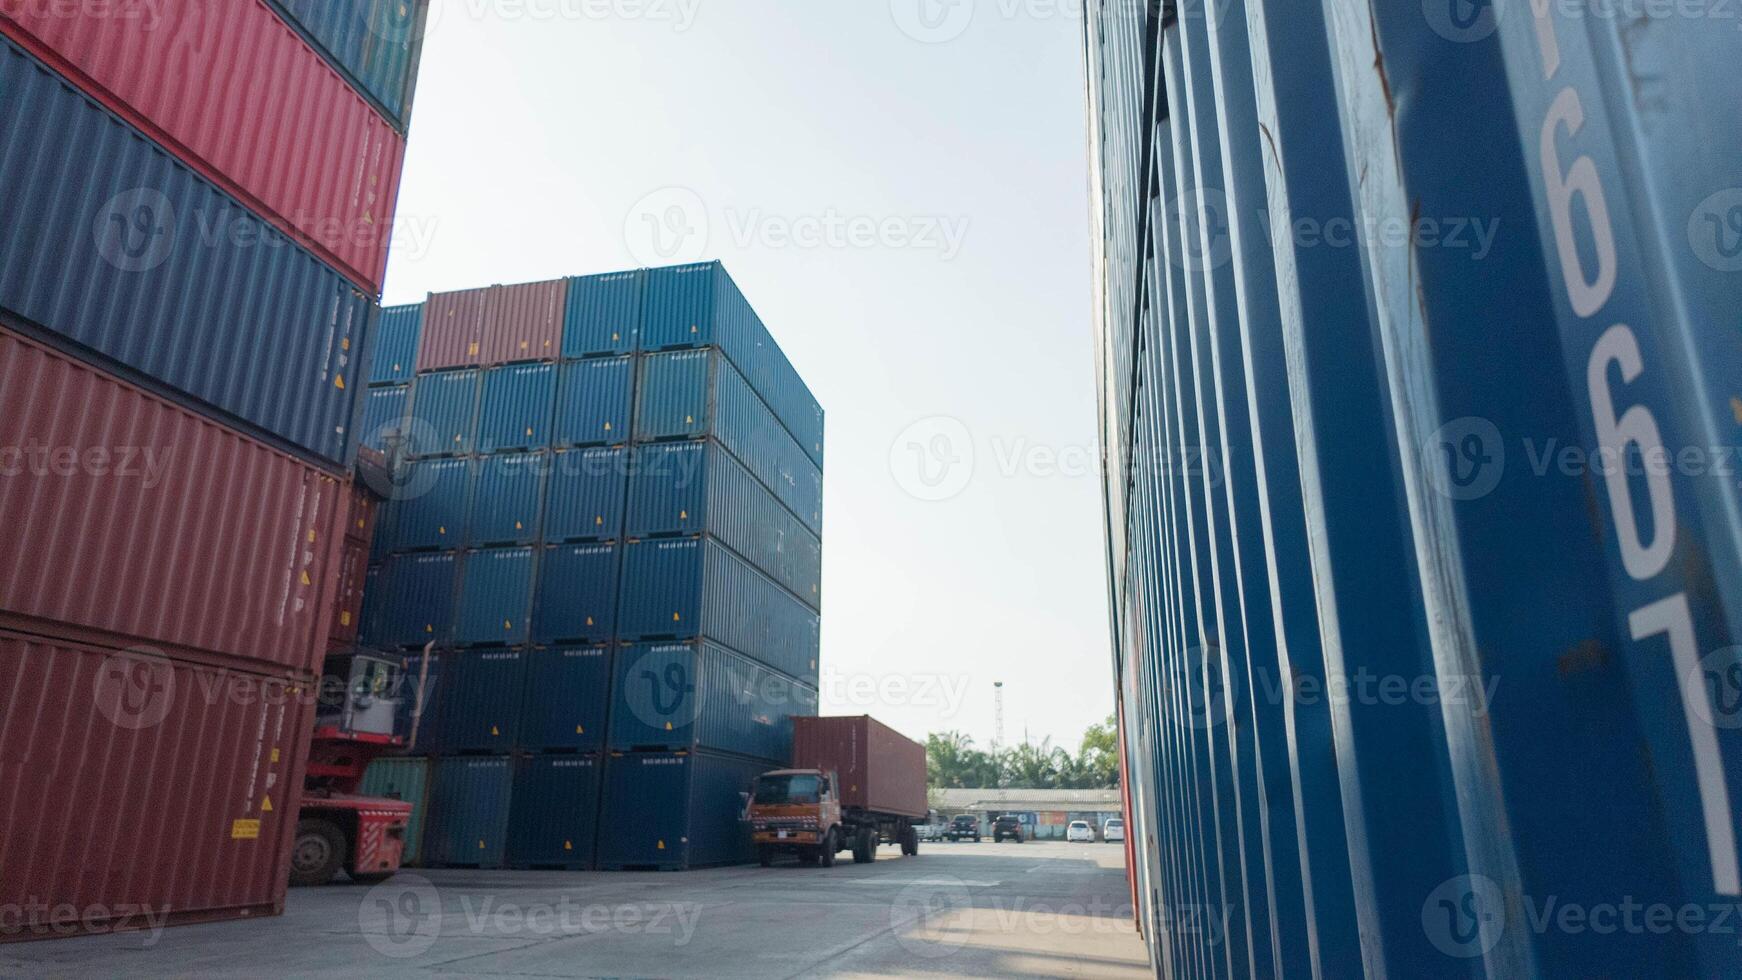 Shipping container import export cargo logistic freight port industry transport delivery trade truck commerce loading international sea technology shipment warehouse international good commercial dock photo